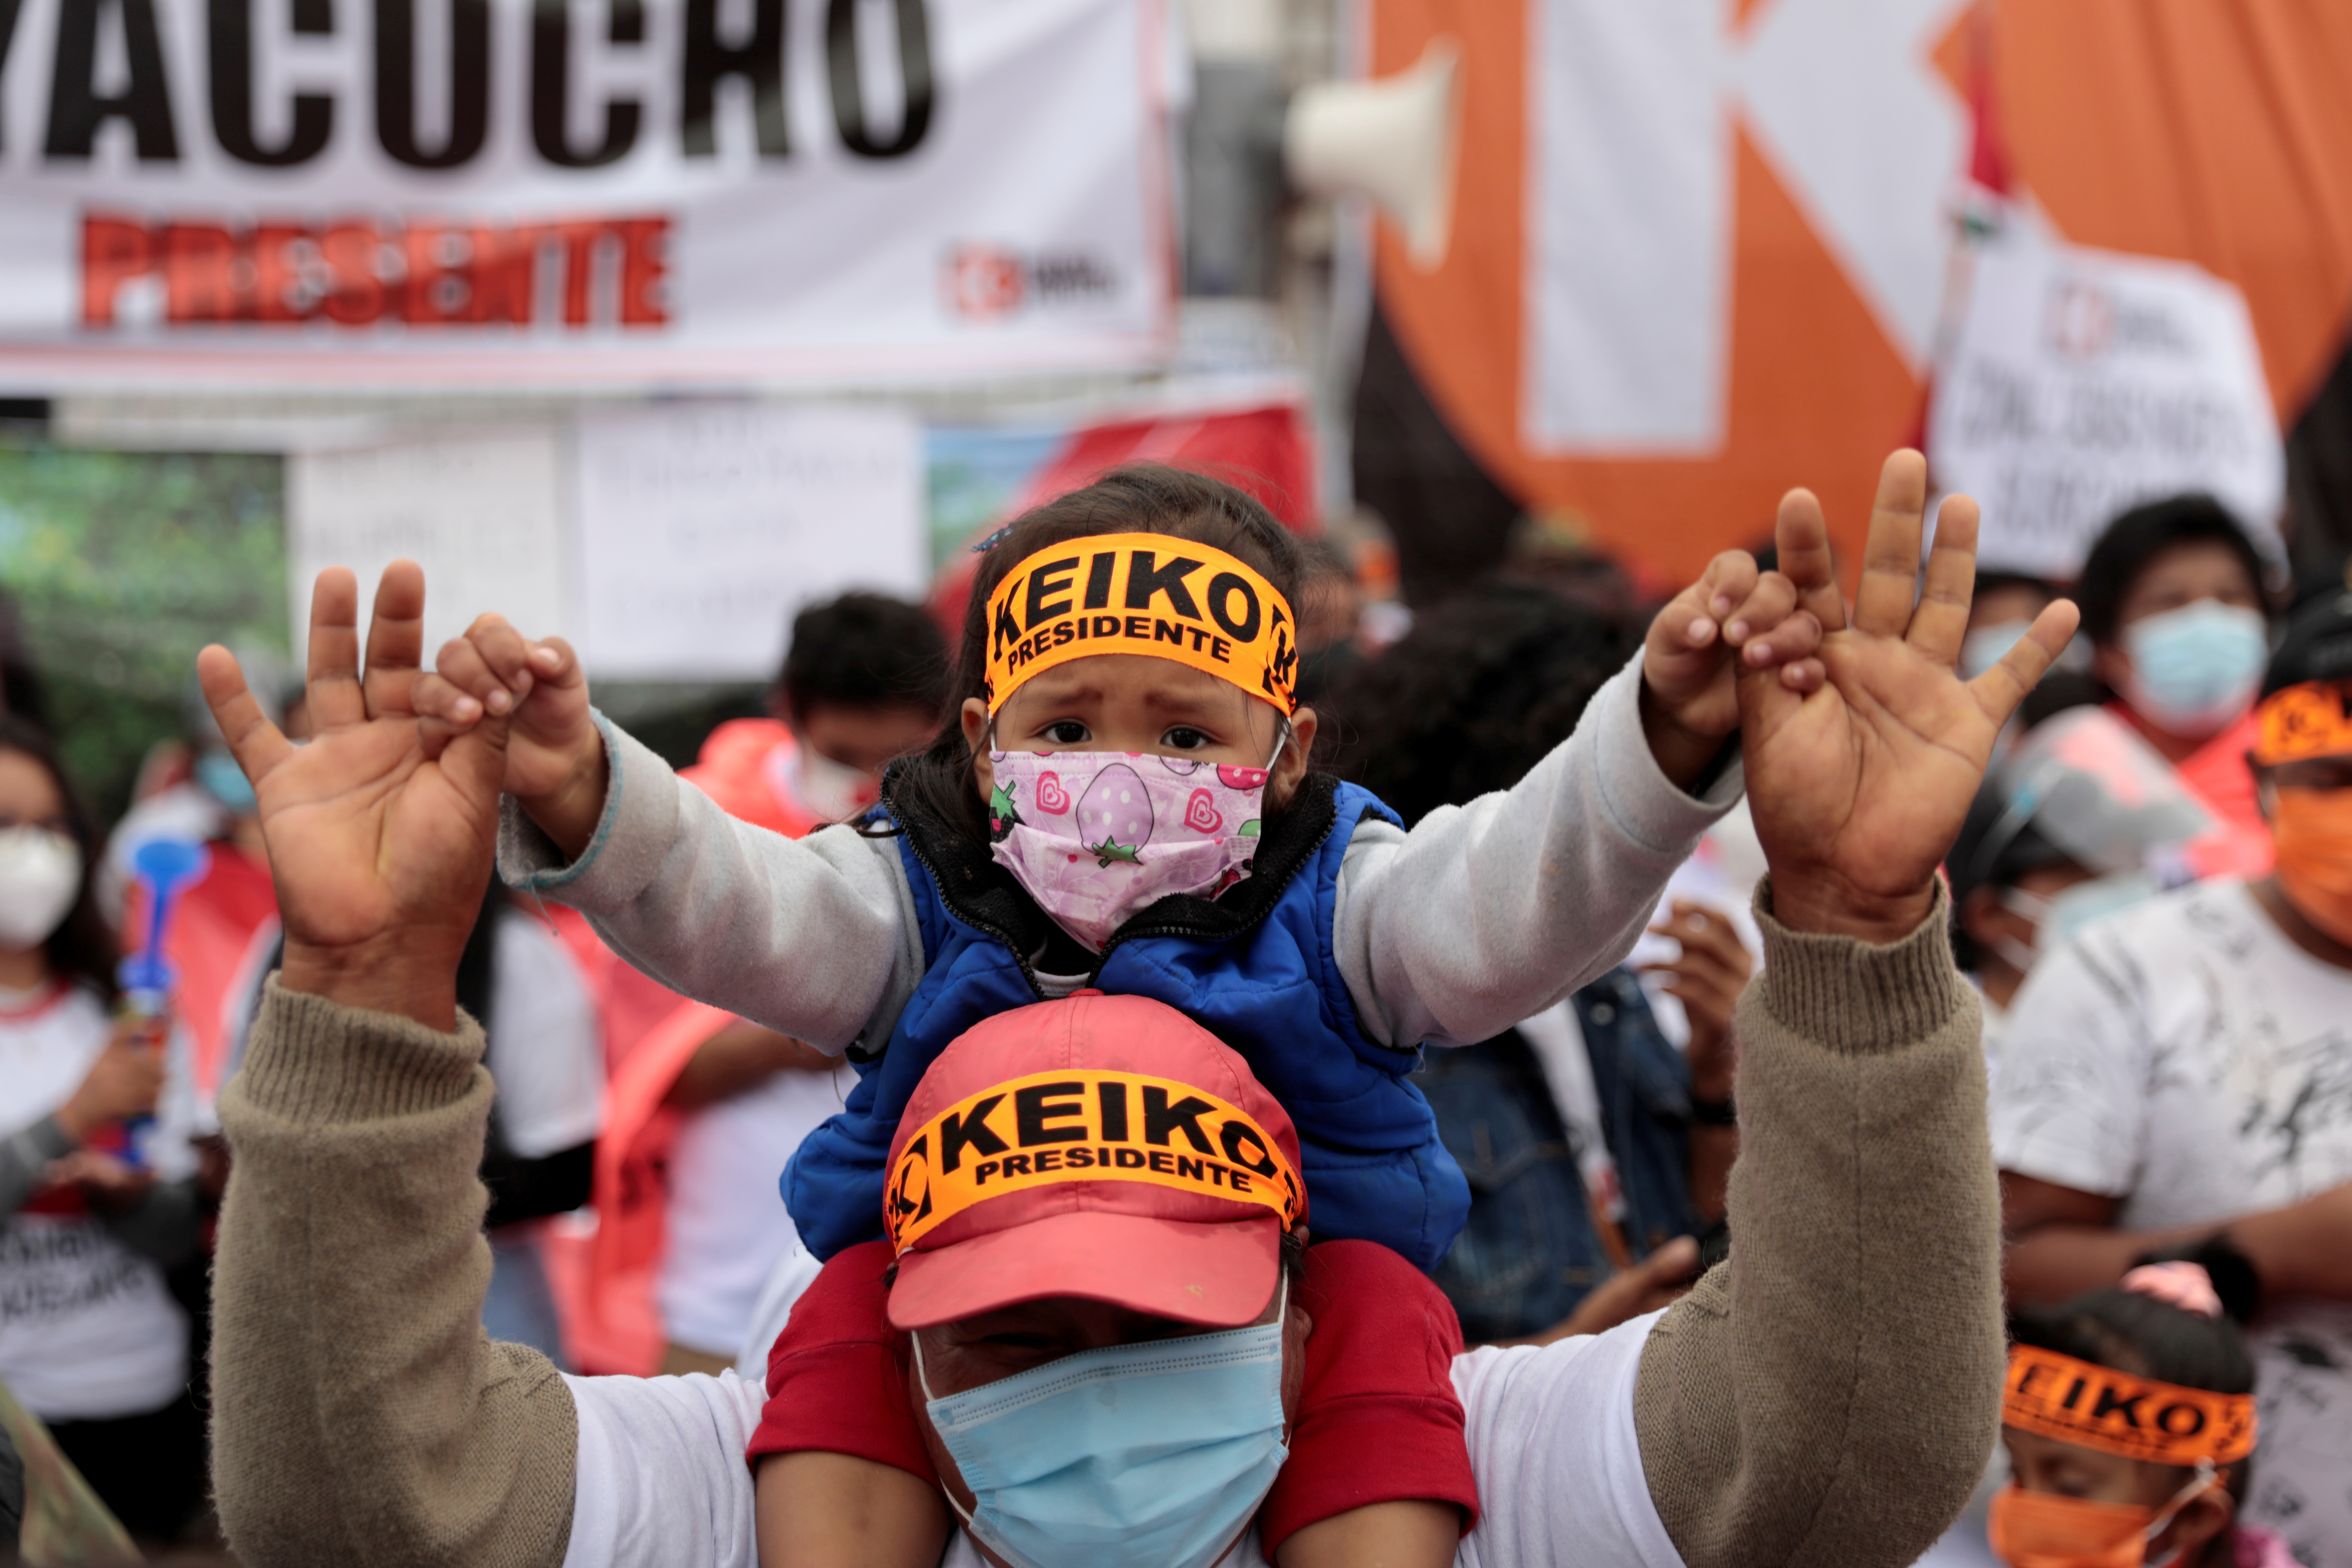 Supporters of Peru's right-wing candidate Keiko Fujimori, who will face opponent socialist candidate Pedro Castillo in a run-off vote on June 6, attend a political rally, in Lima, Peru May 15, 2021. REUTERS/Alessandro Cinque    